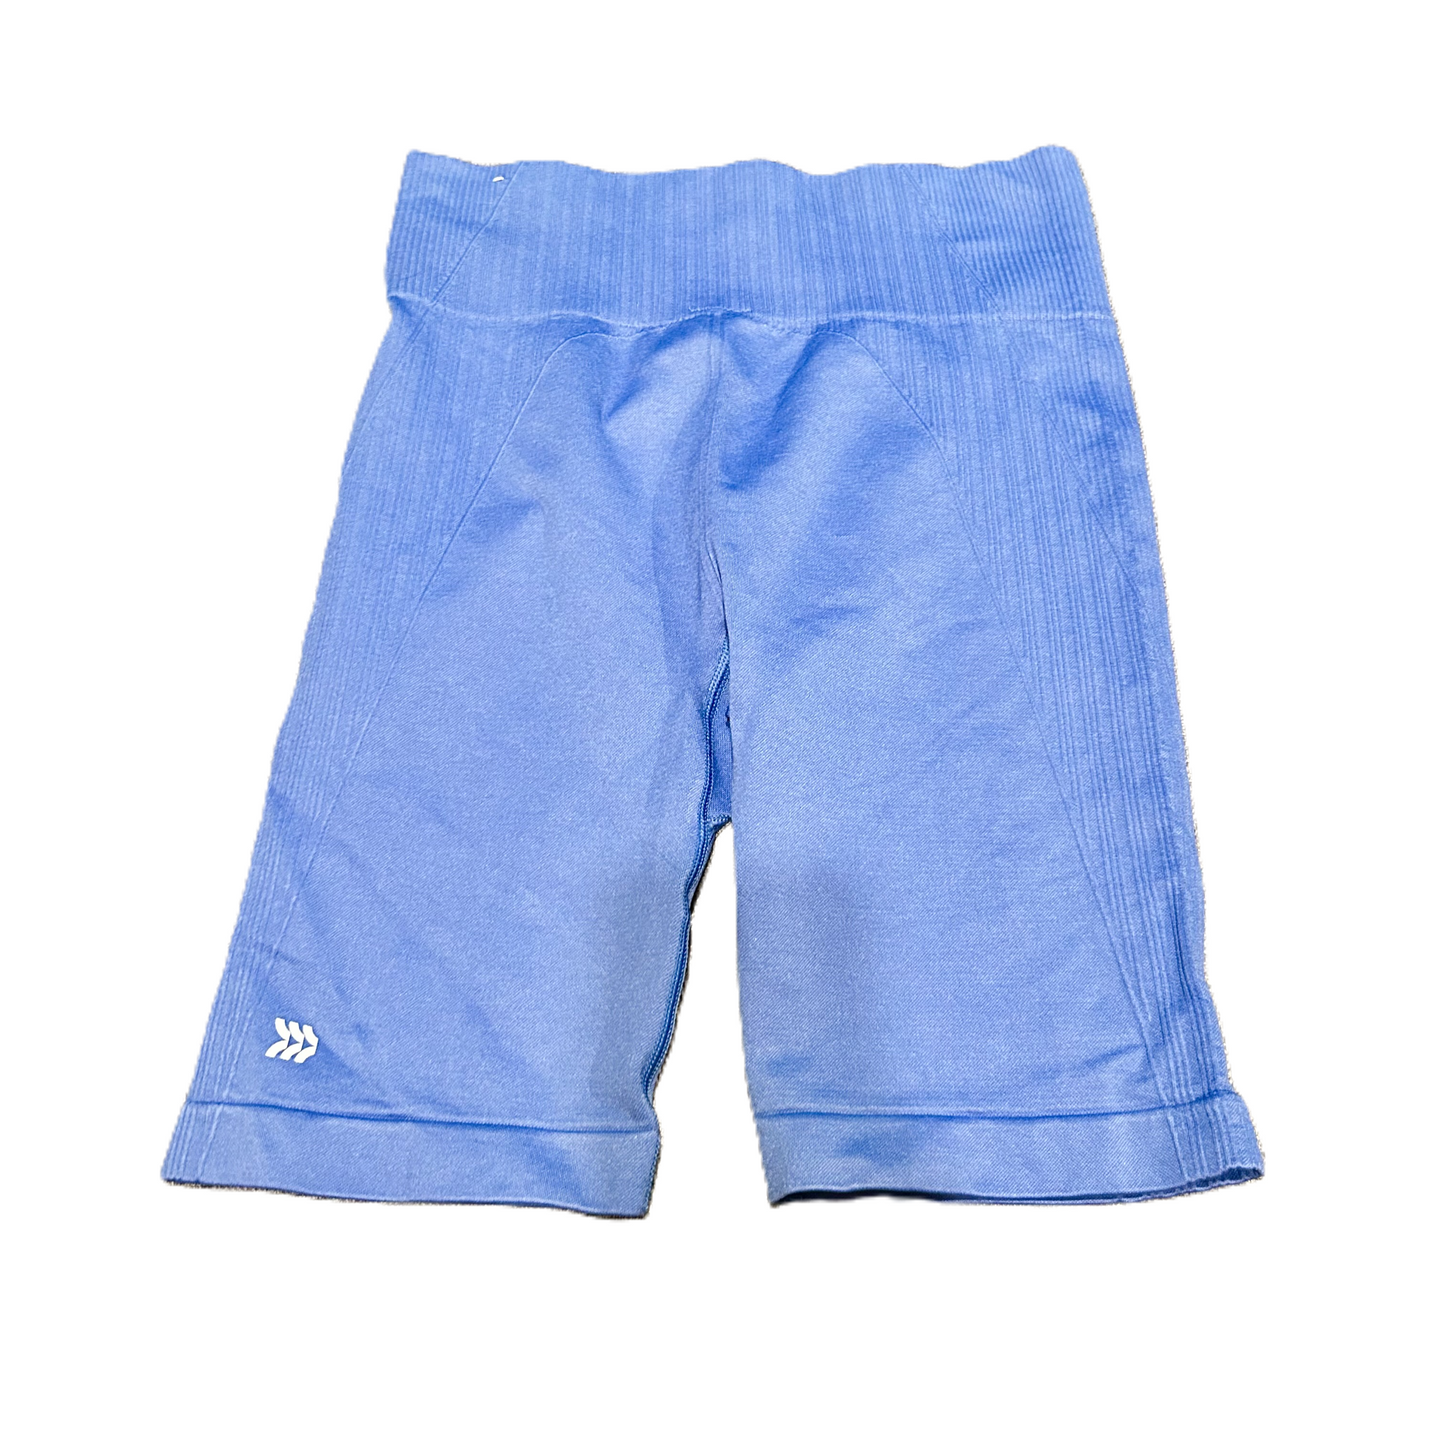 Blue Athletic Shorts By All In Motion, Size: M